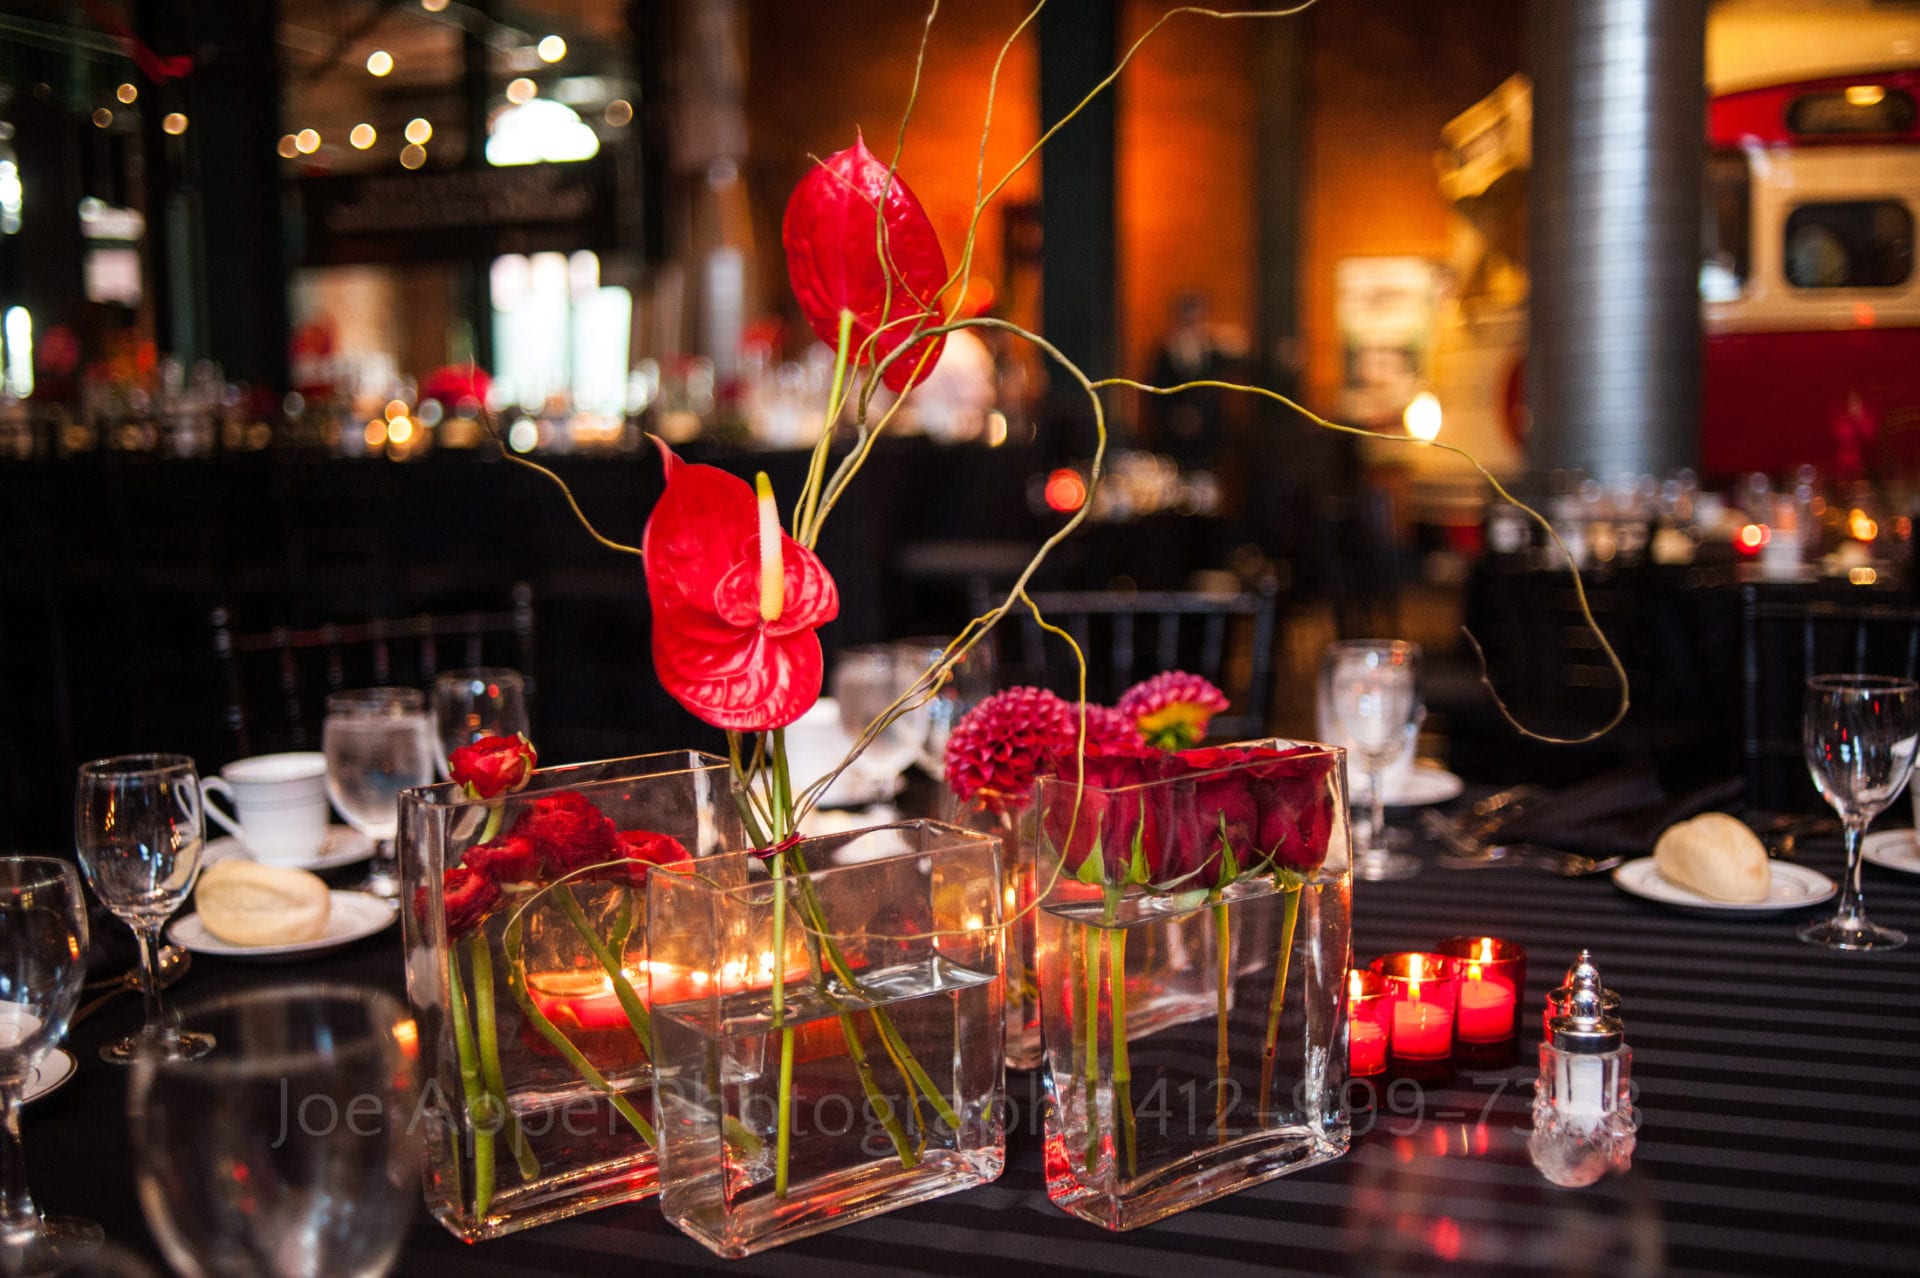 square glass vases contain red roses at the center of a table.